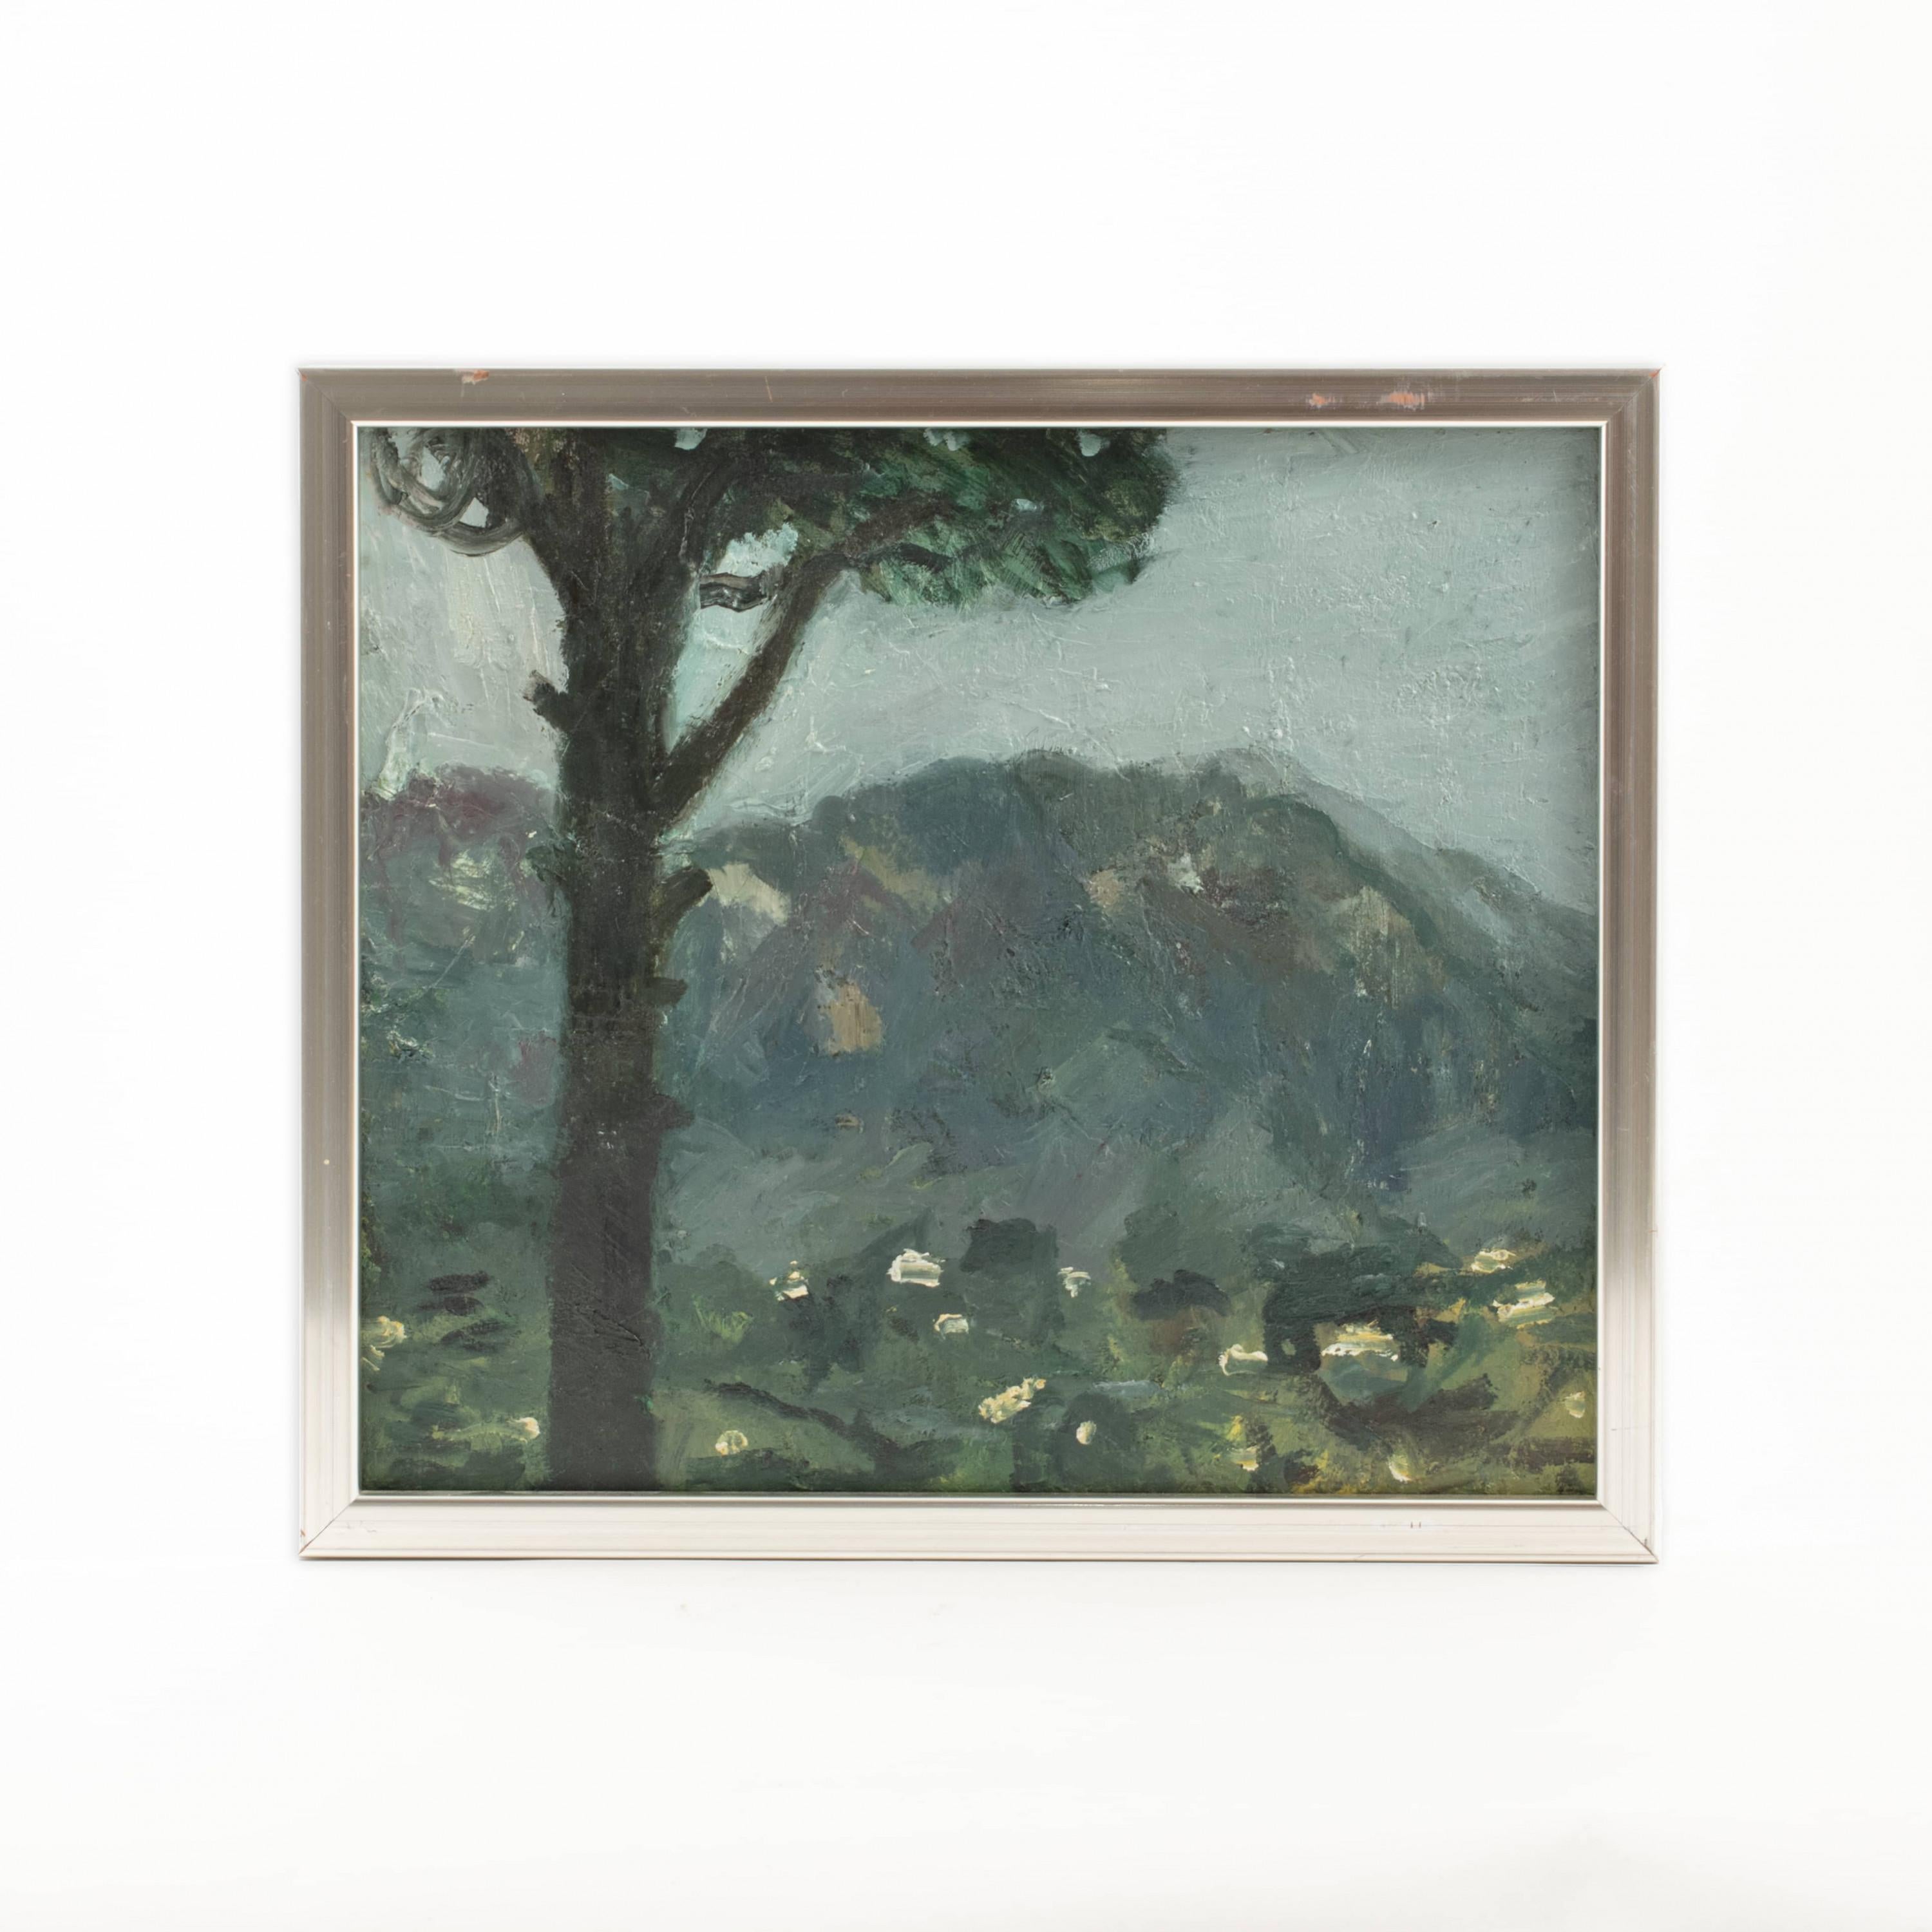 Preben Fjederholt 1955 - 2000.
San Cataldo Italy.
Oil on canvas, without frame: 36 x 41.
Provenance: Decedent's estate.
The work is one of several in the artist's studio at the time of his sudden death on 3 July 2000.
Measurement (cm) With